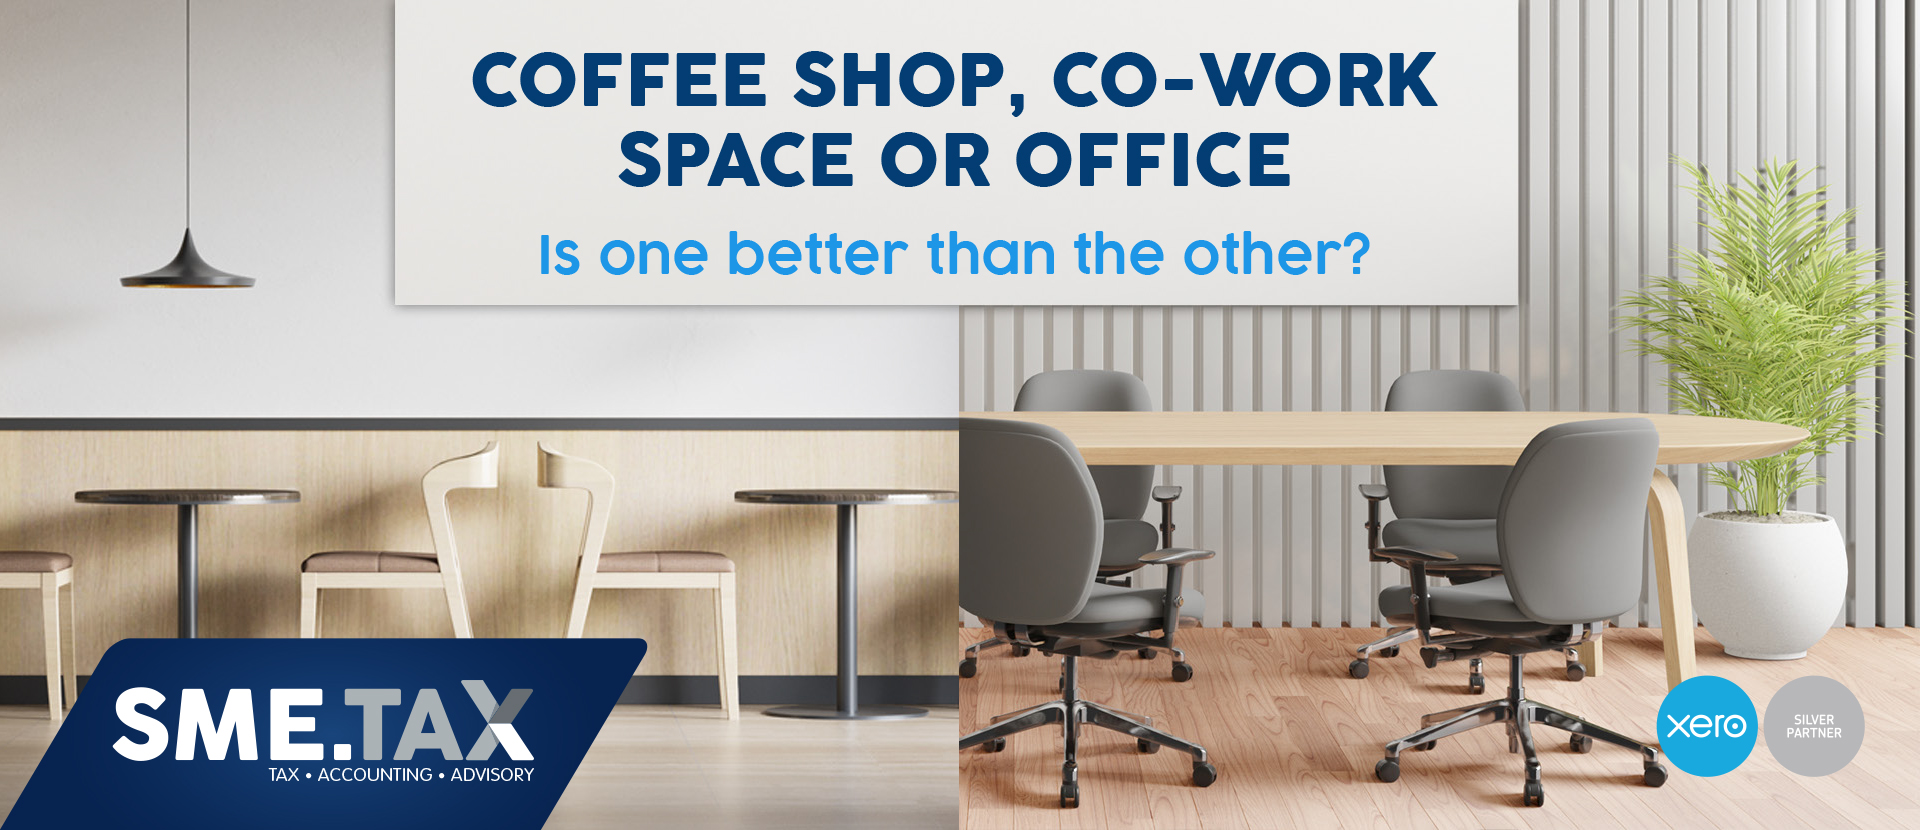 SME.TAX Blog Coffee Shop Co-work or Office